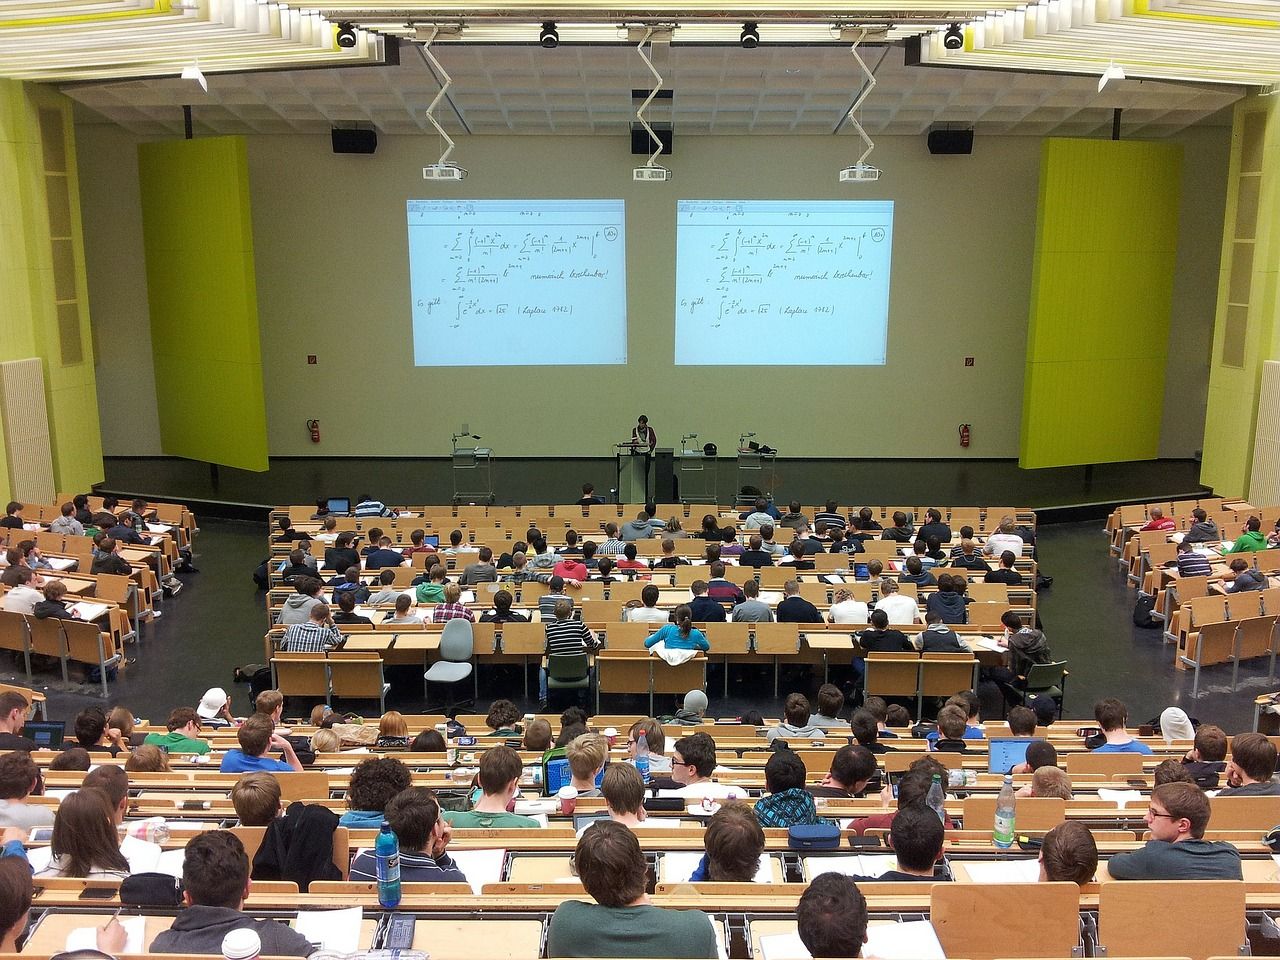 very large college lecture classroom filled with students